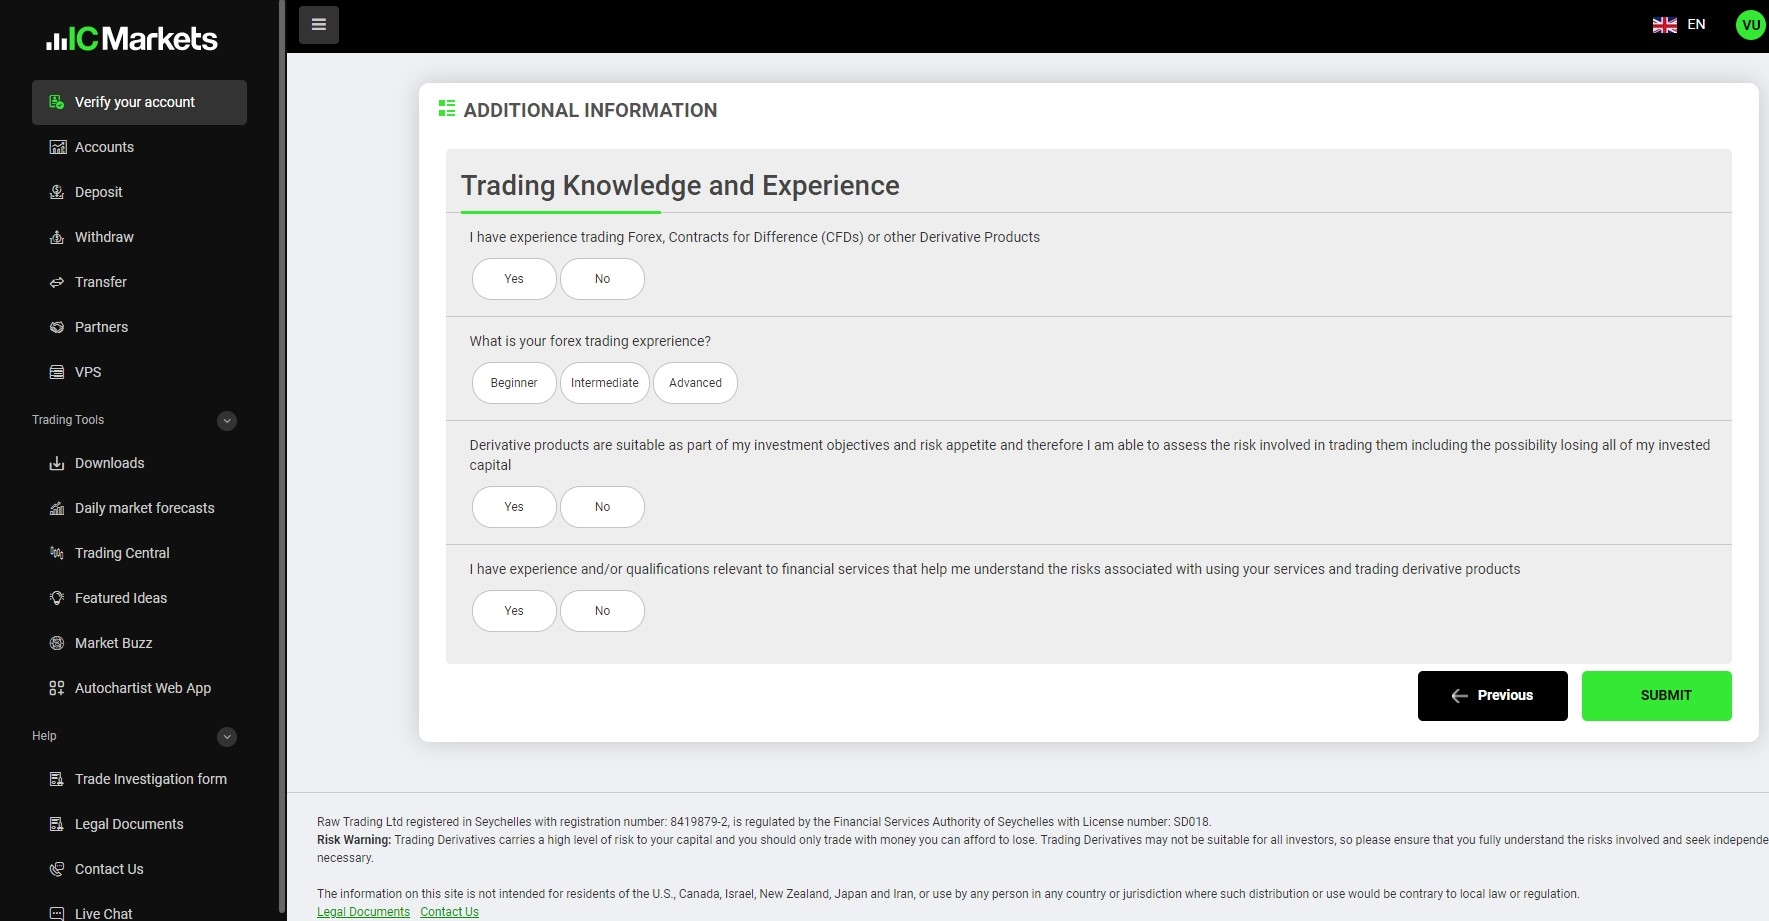 Information about trading experience at IC Markets